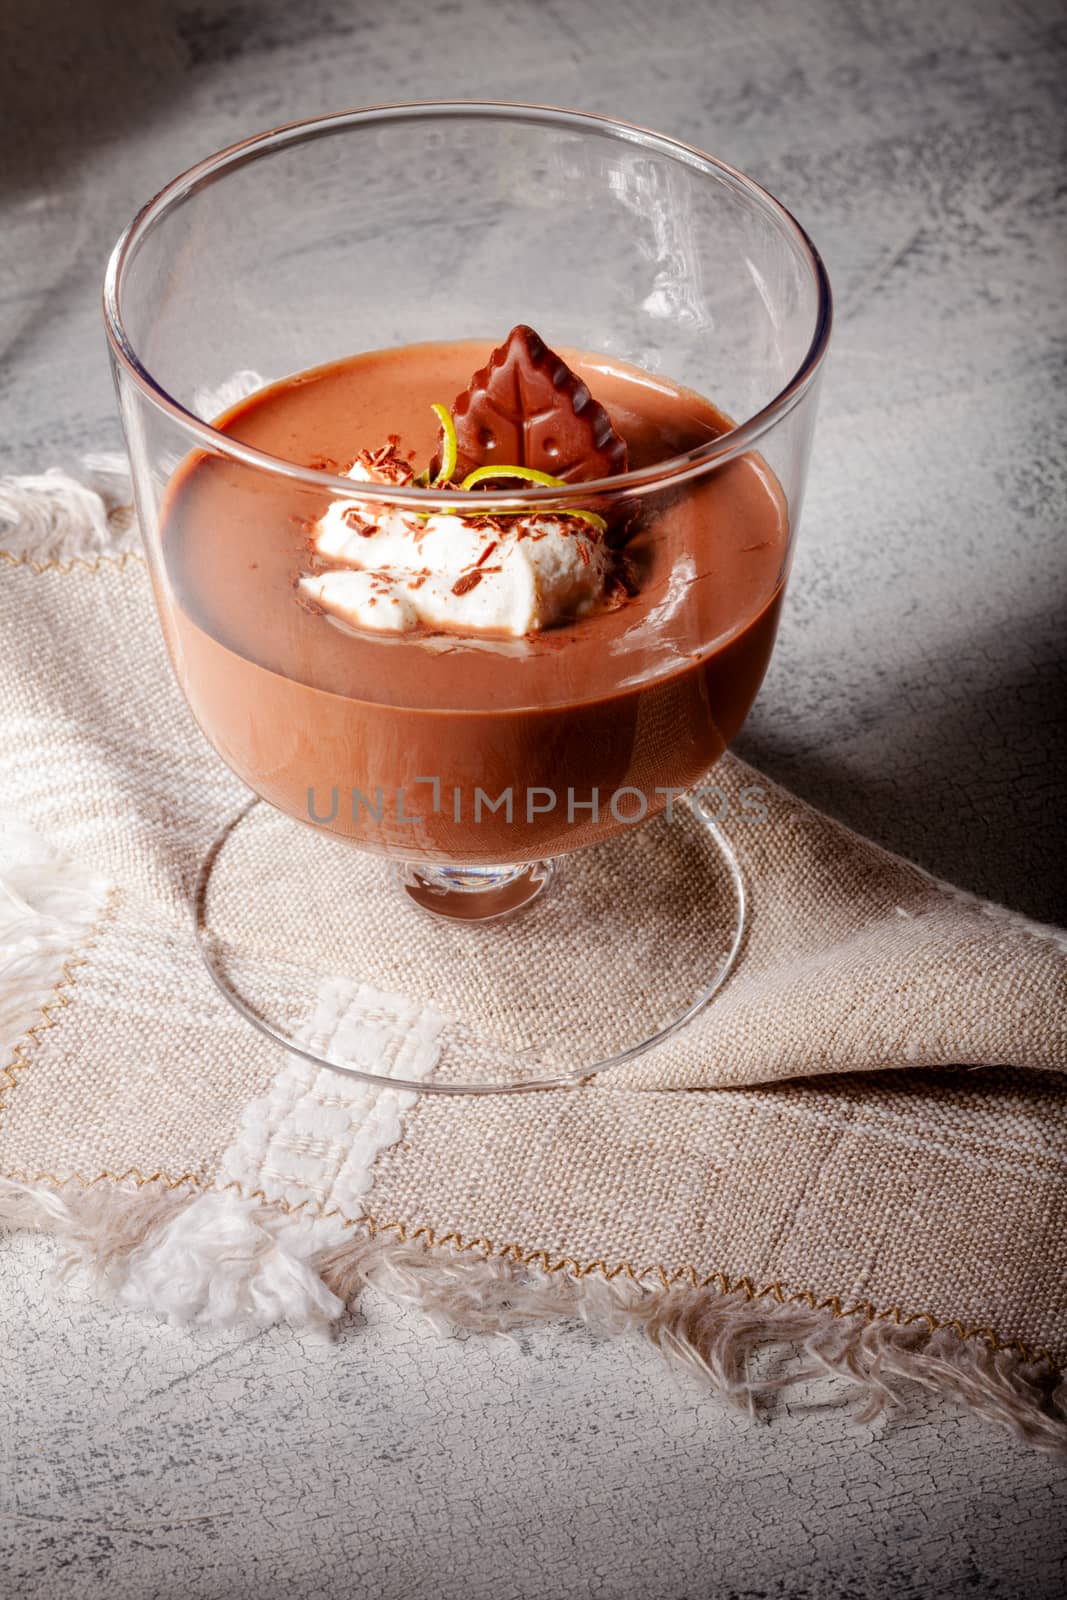 Chocolate Mousse Dessert by supercat67